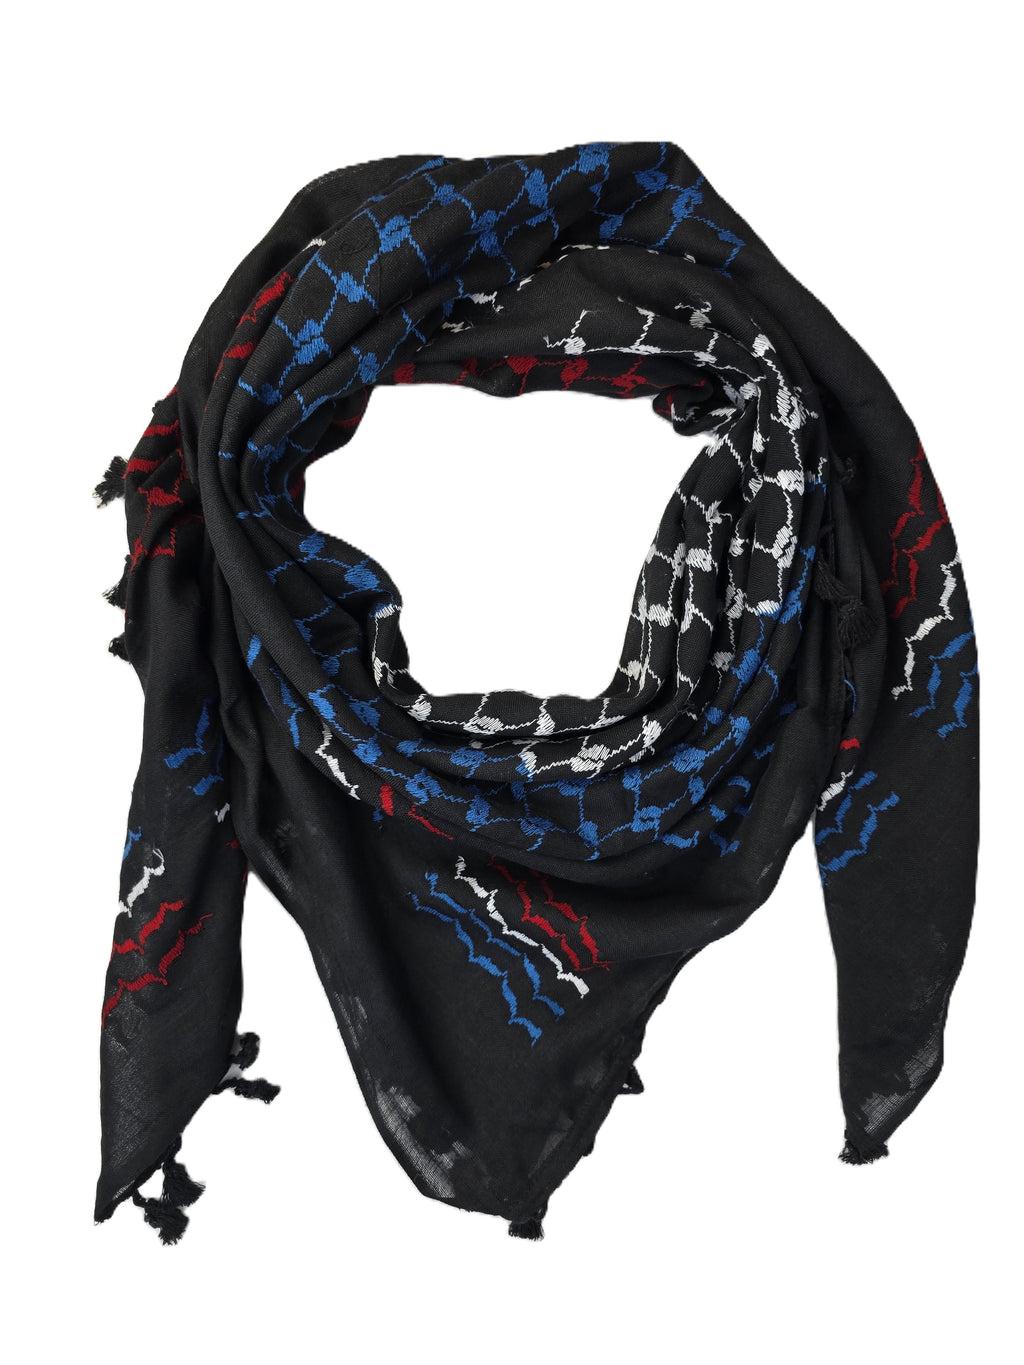 Keffiyeh Scarf Made in Palestine -  Black with Red, Blue, and White